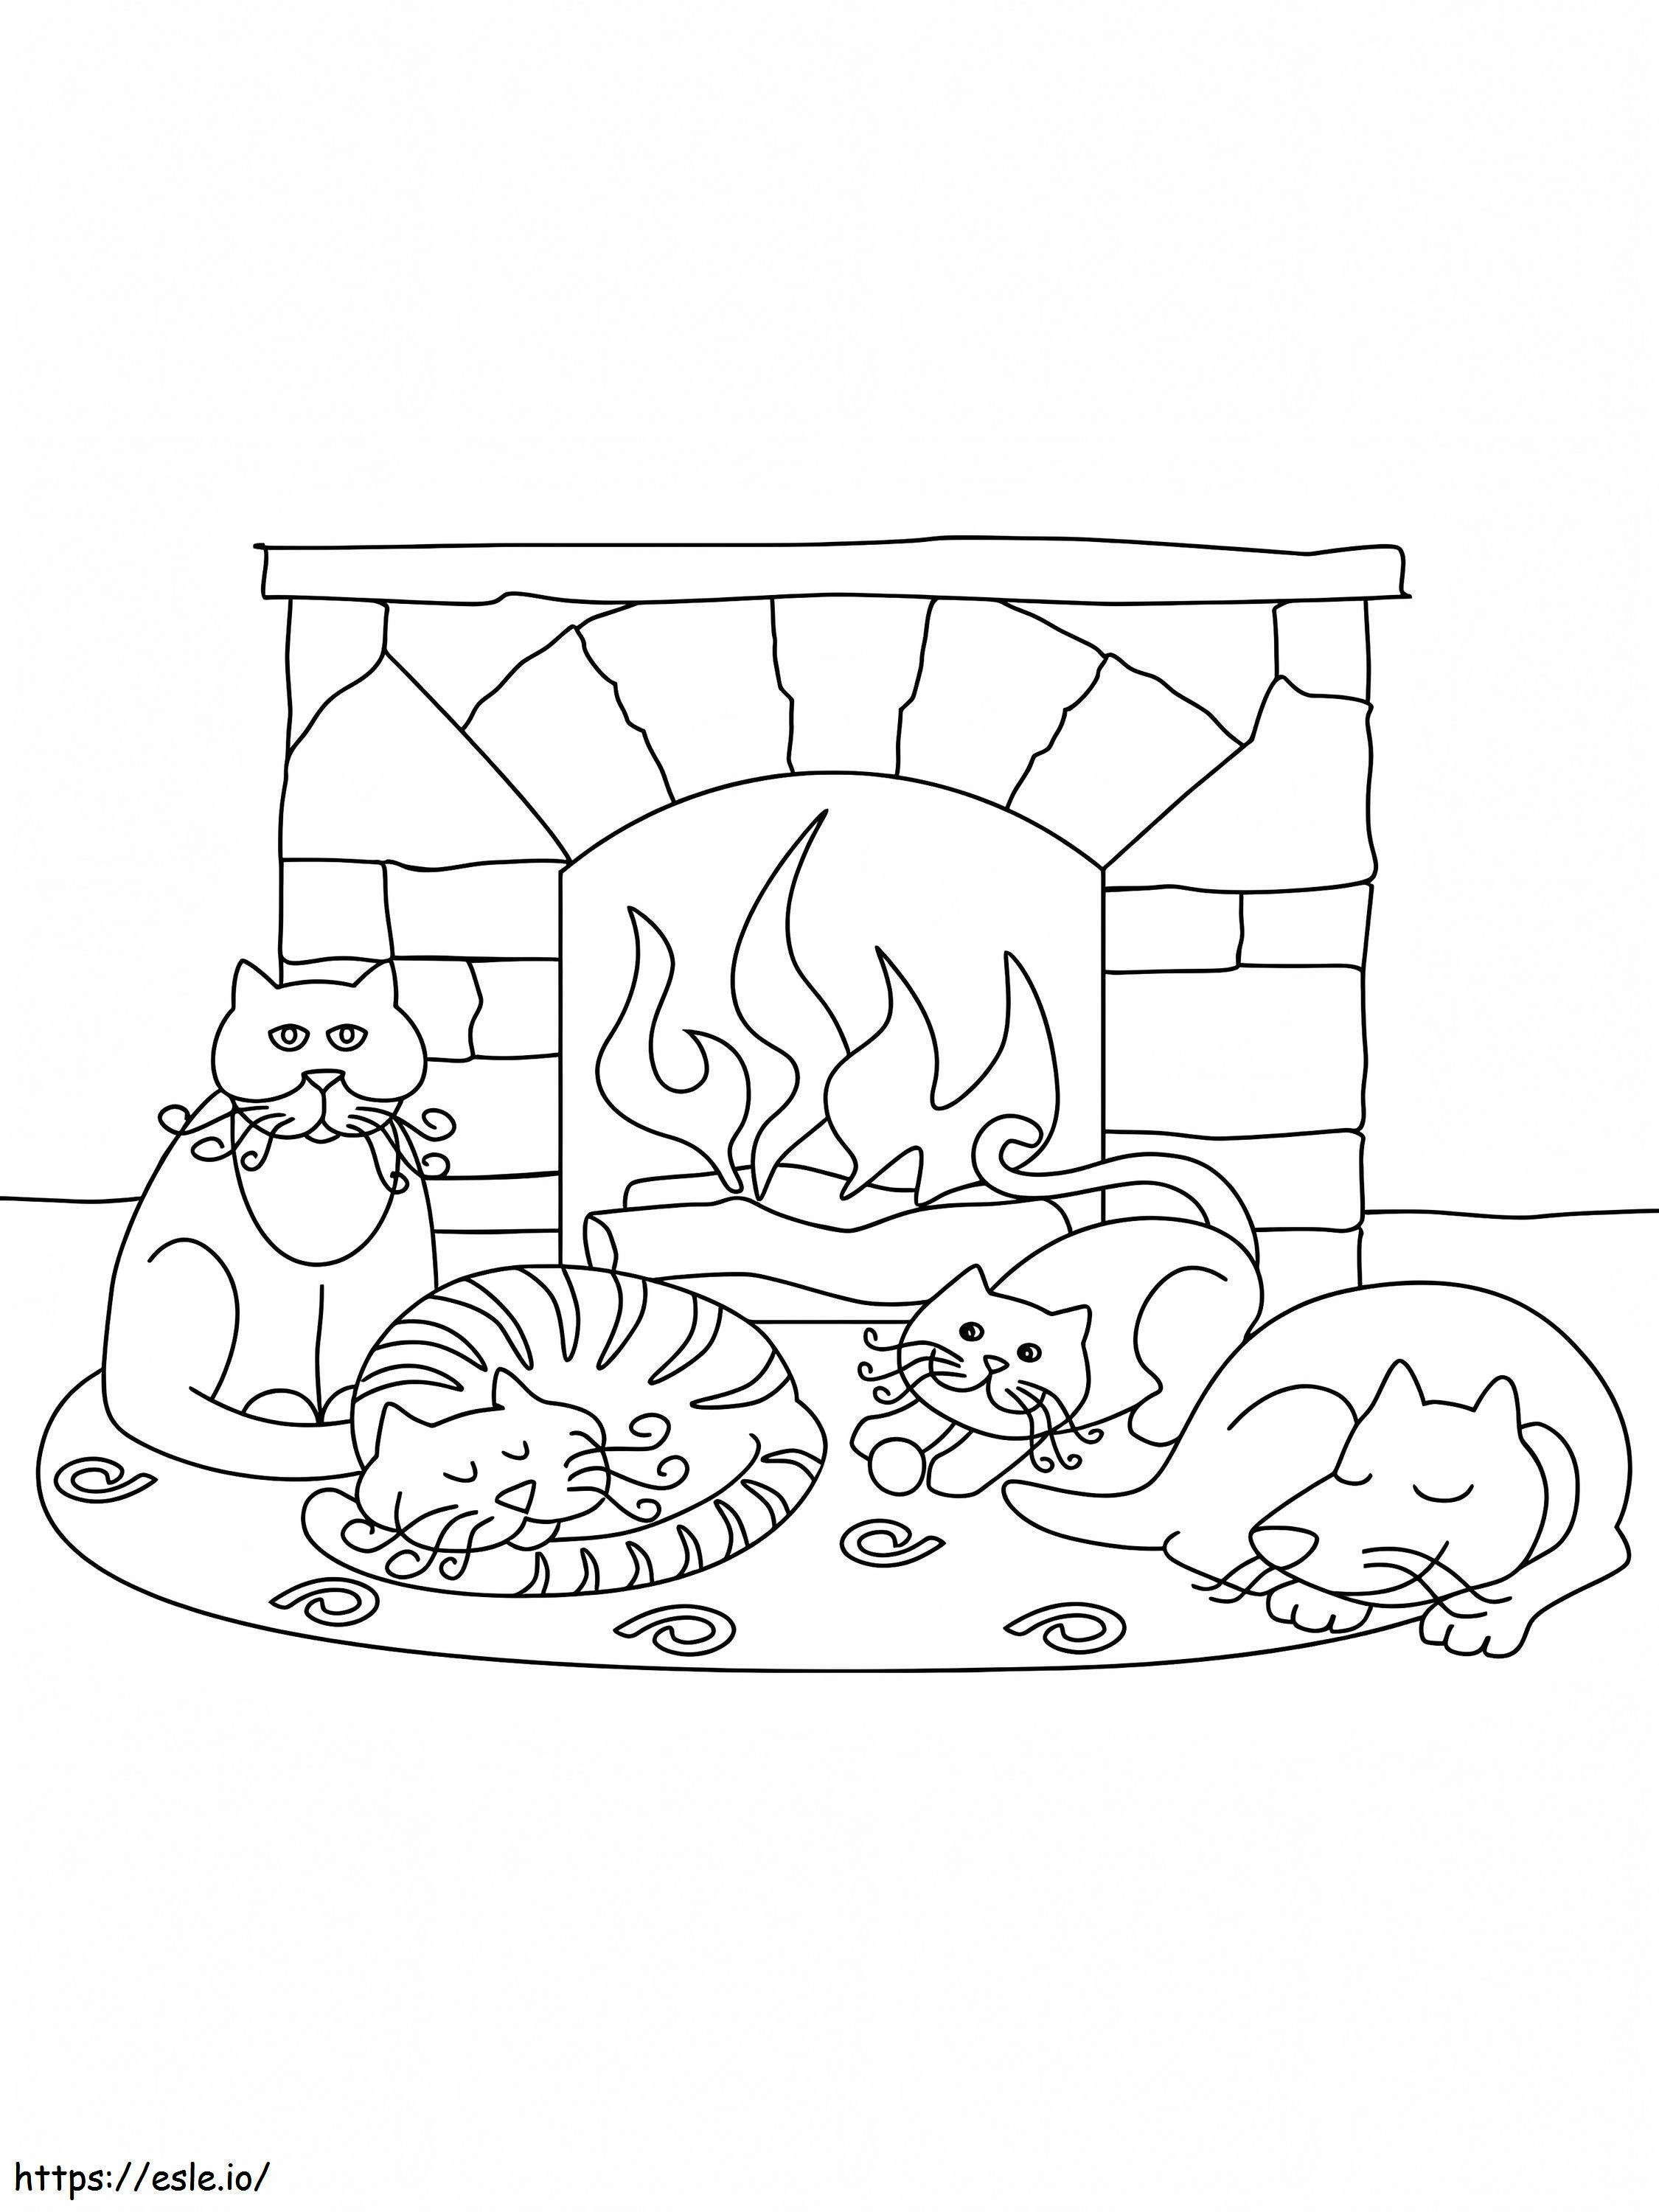 Cats And Fireplace coloring page